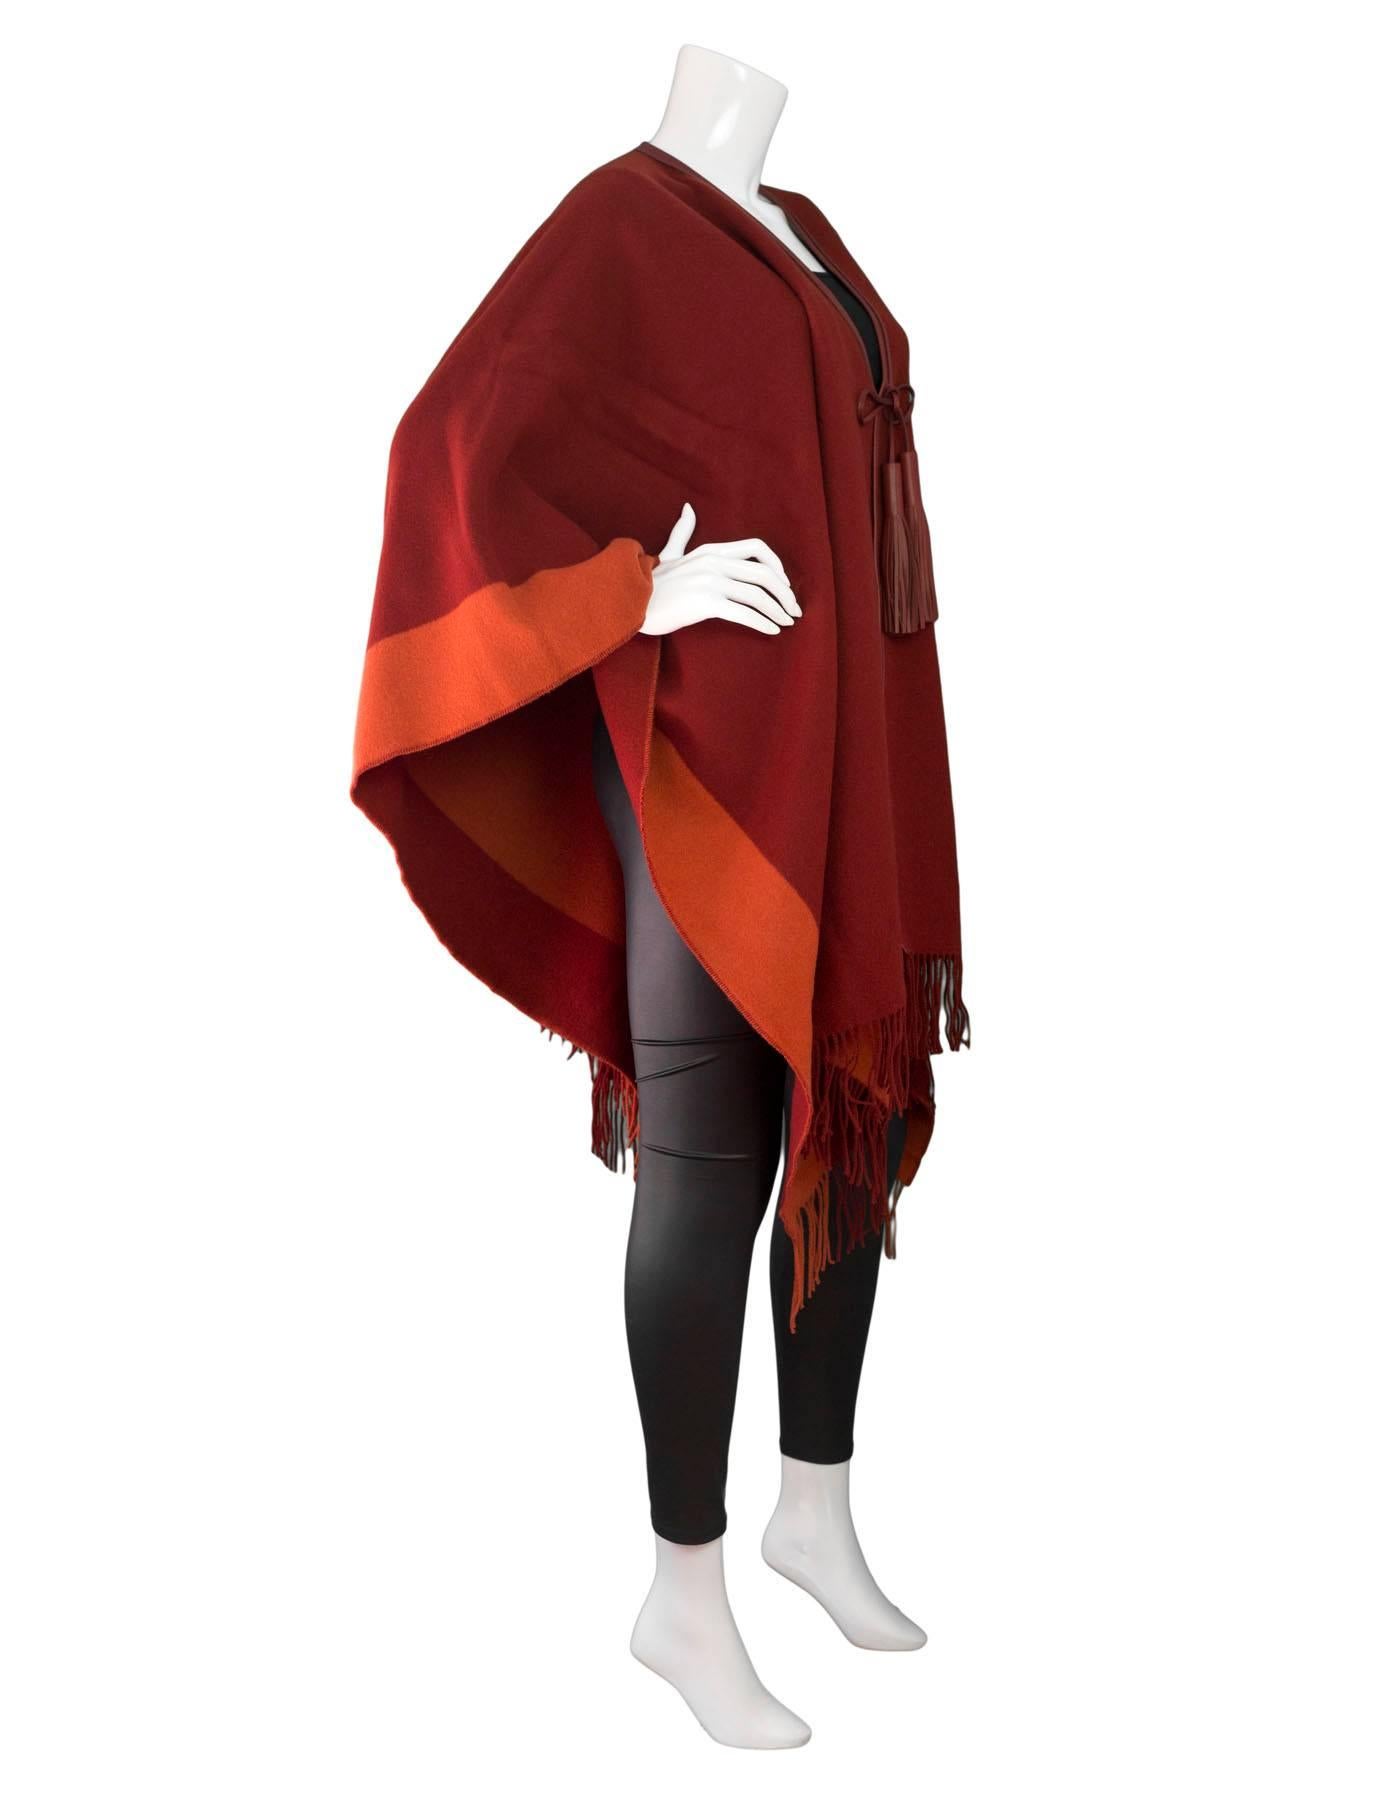 Hermes Burgundy Wool Rocabar Poncho
Features leather trim and tassels

Made In: France
Color: Burgundy
Composition: 90% Wool, 10% Cashmere
Retail Price: $1,325 + tax
Overall Condition: Excellent pre-owned condition 
Included: Hermes